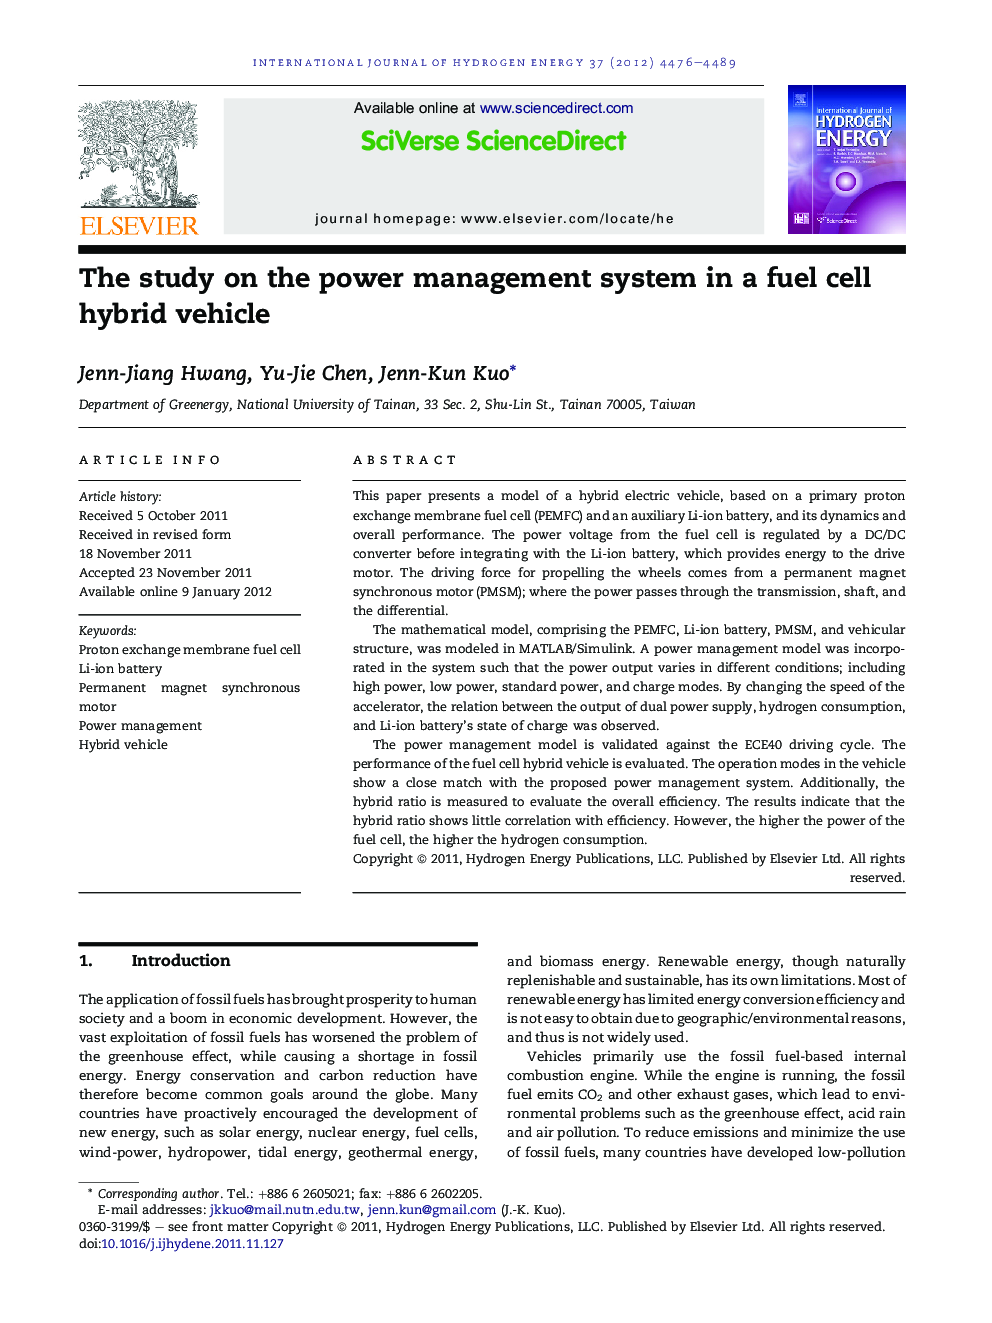 The study on the power management system in a fuel cell hybrid vehicle